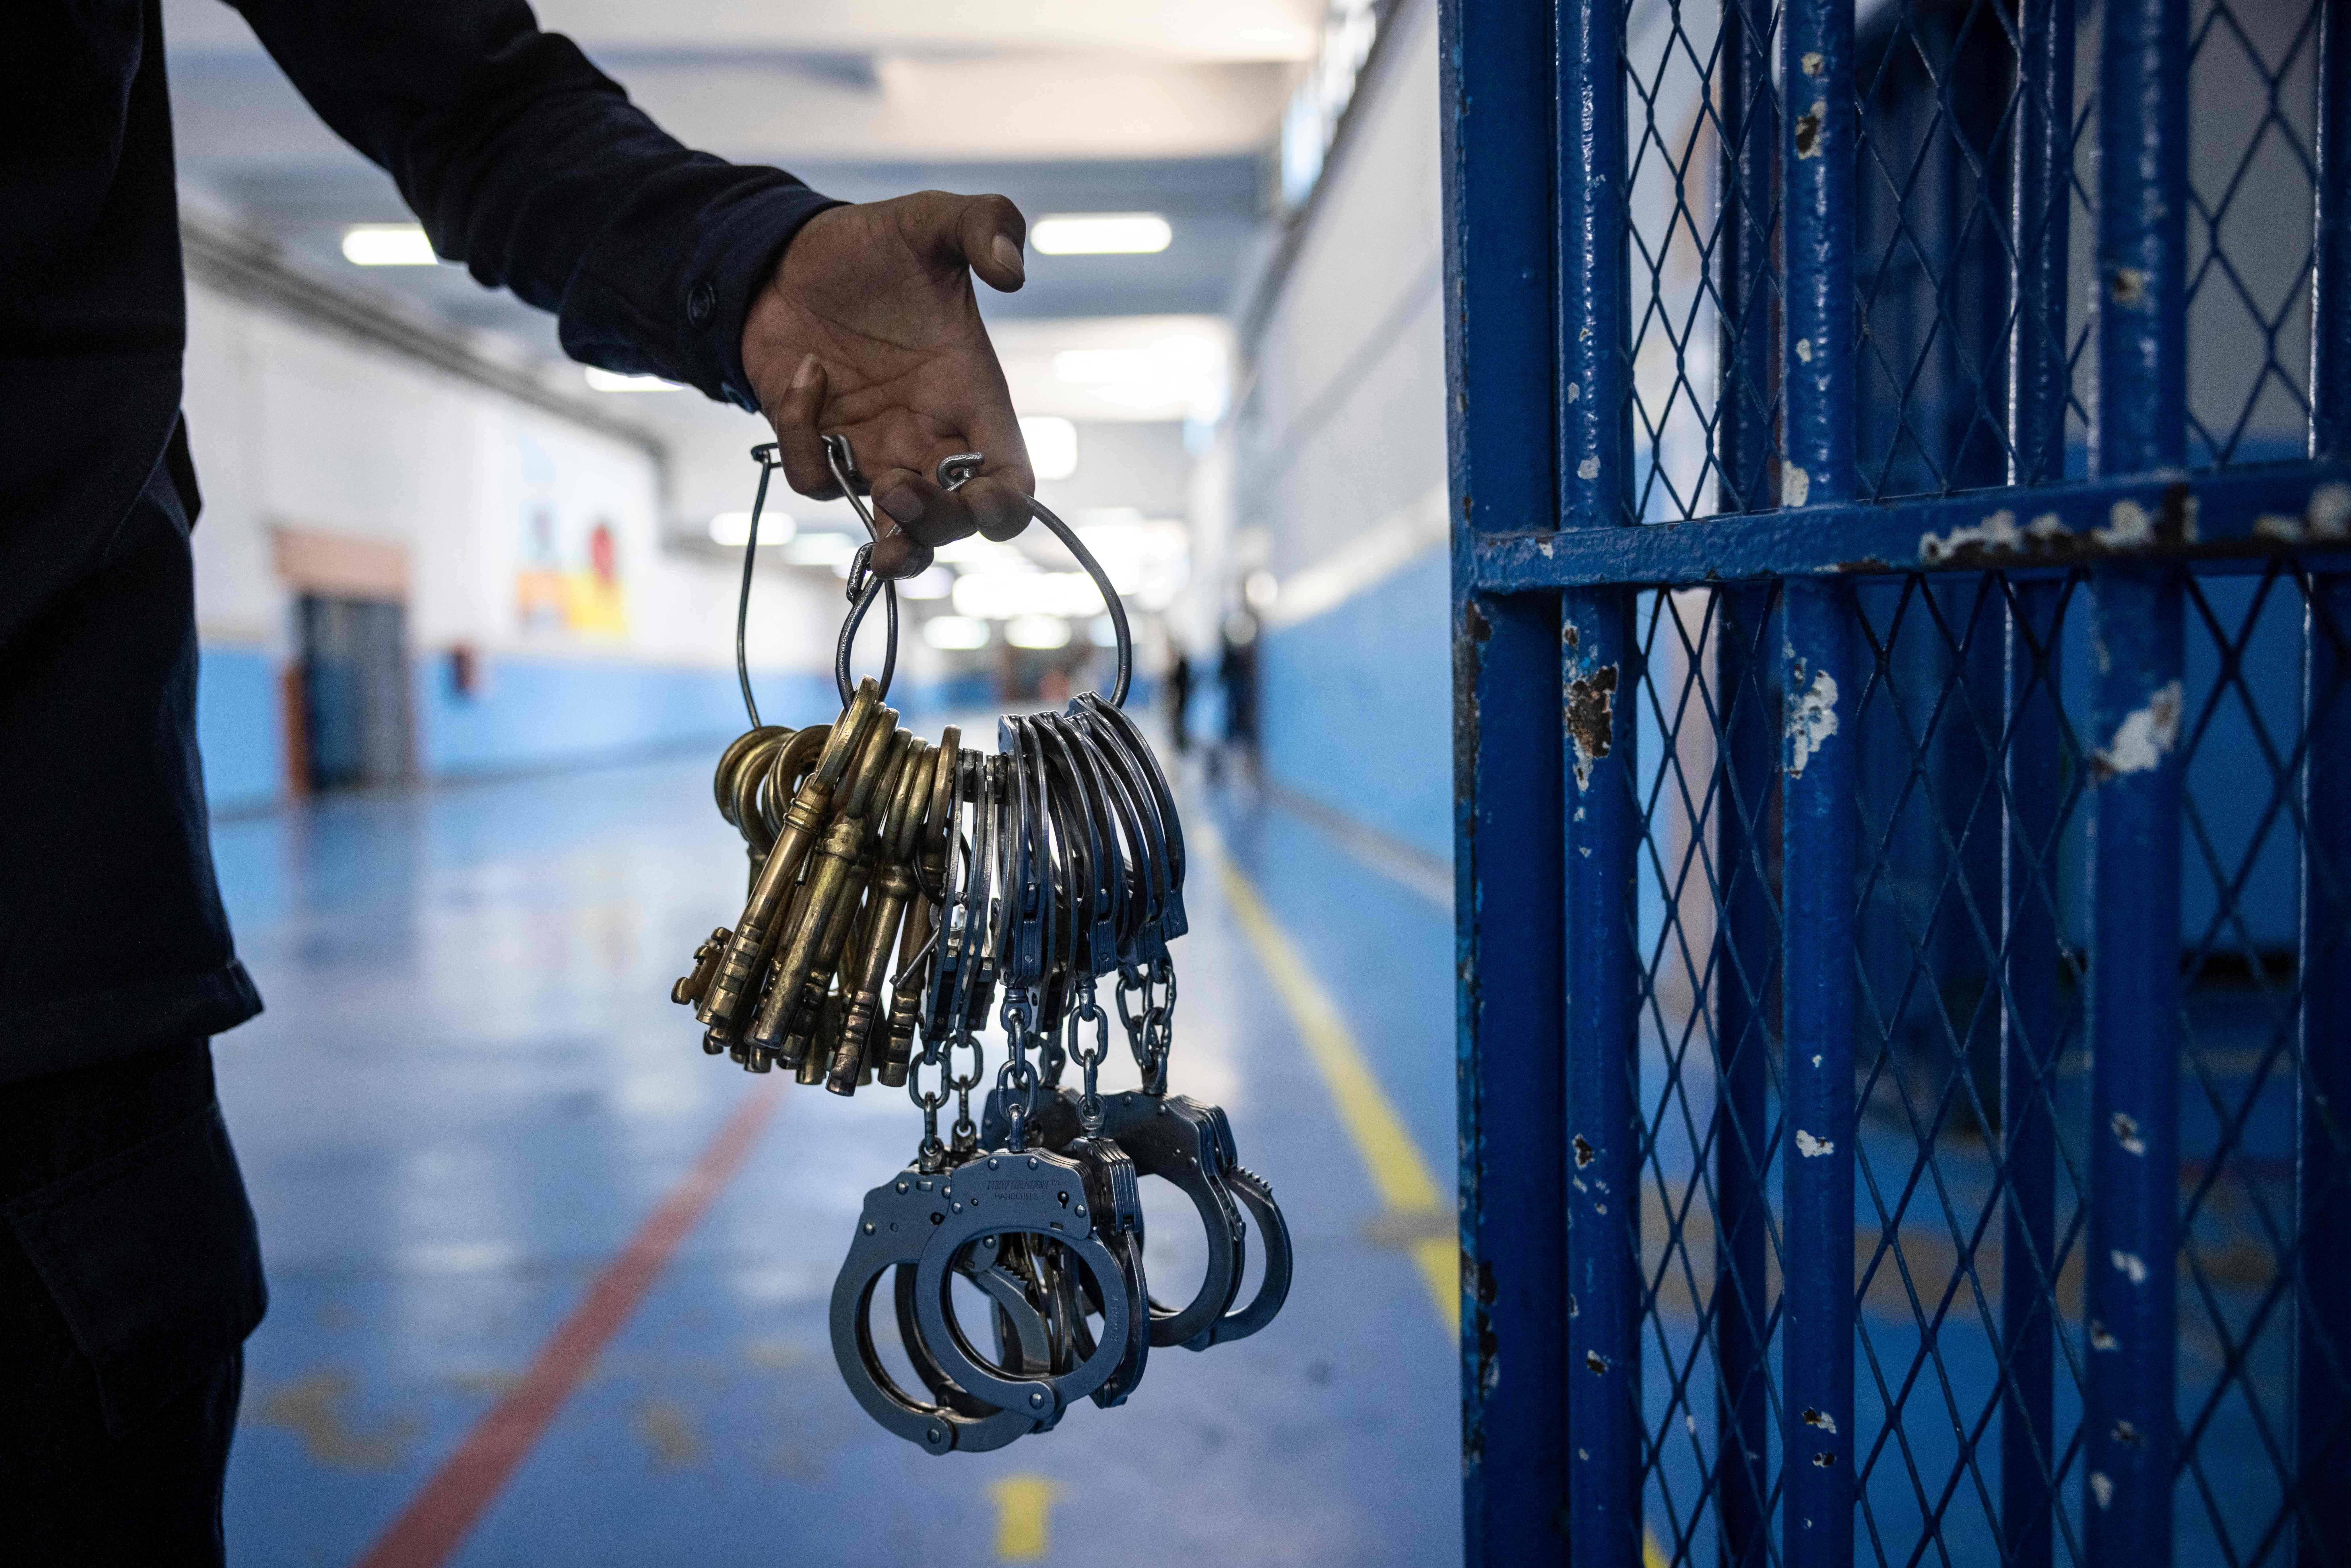 A guard carries keys and handcuffs at the prison of Kenitra, in the coastal city of the same name, near the Moroccan capital Rabat, on August 31, 2021. - After passing through the North African kingdom's Moussalaha ("Reconciliation") programme, some prisoners are hoping for a reprieve. The programme, launched in 2015 and led by Morocco's DGAPR prison service with several partner organisations, aims to help terror detainees who are willing to question their beliefs. (Photo by FADEL SENNA / AFP) (Photo by FADEL SENNA/AFP via Getty Images)